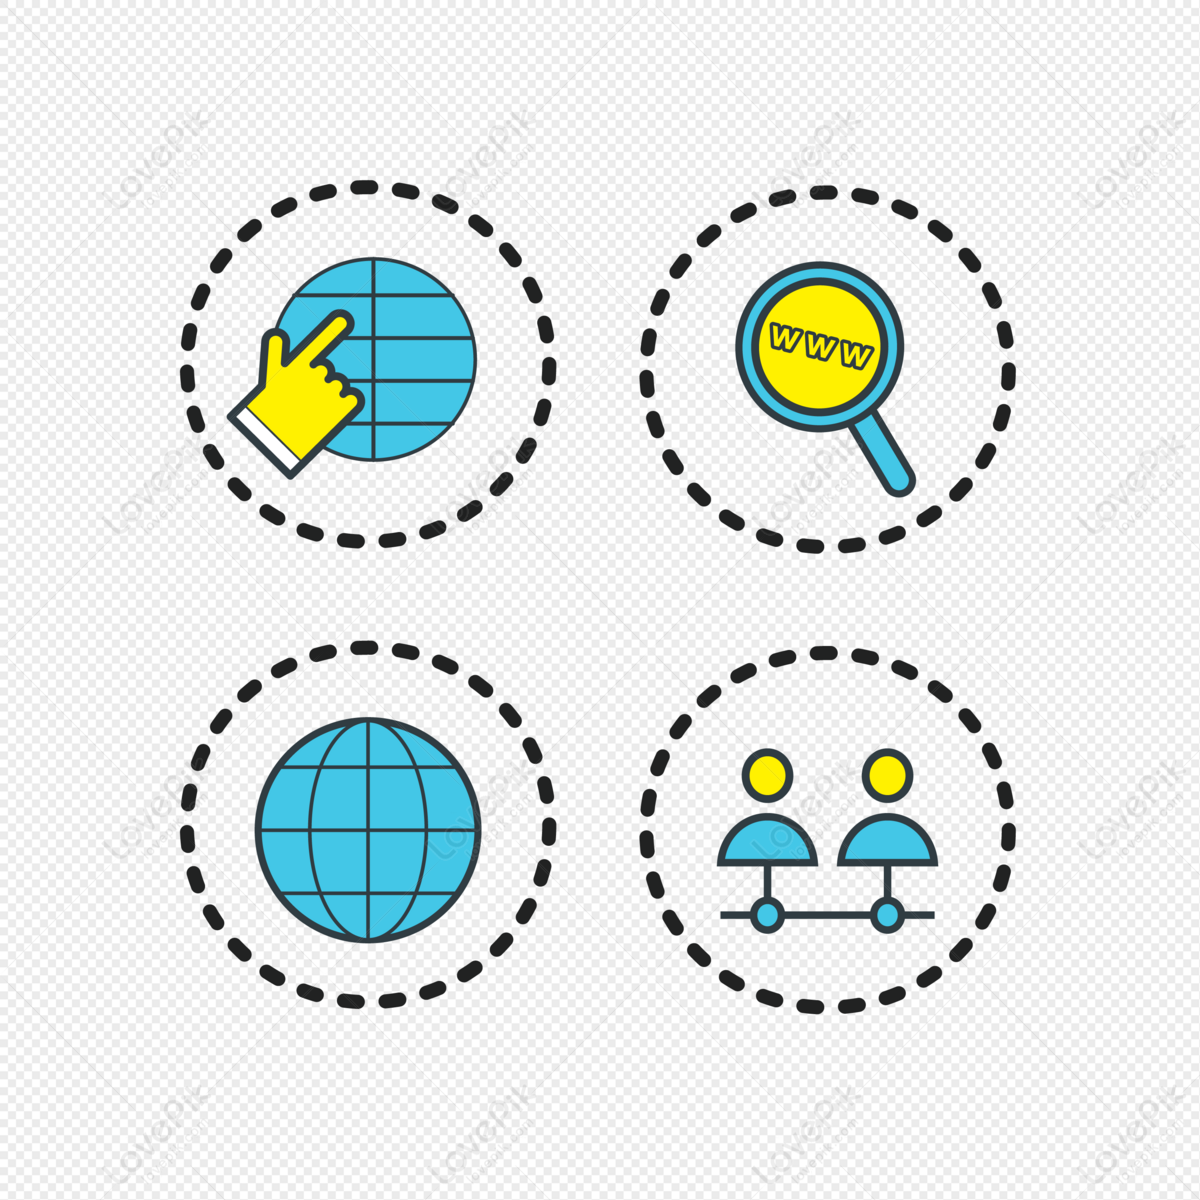 Visit internet online or www web page flat icon Vector Image